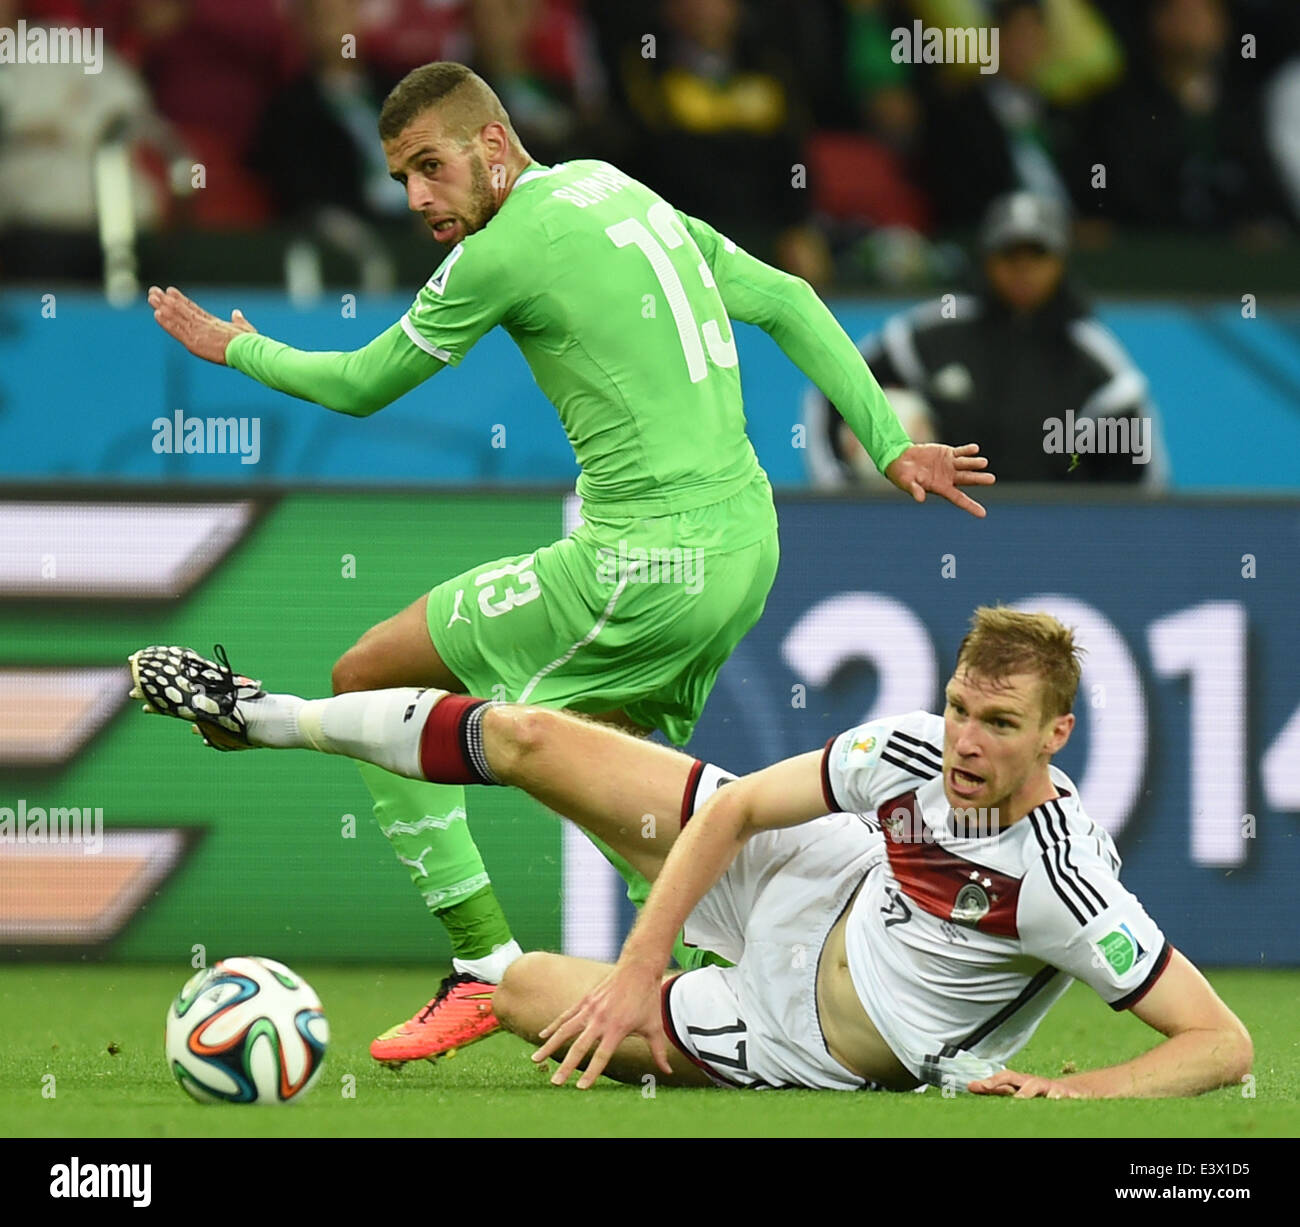 Porto Alegre, Brazil. 30th June, 2014. Algeria's Islam Slimani (L) vies with Germany's Per Mertesacker during a Round of 16 match between Germany and Algeria of 2014 FIFA World Cup at the Estadio Beira-Rio Stadium in Porto Alegre, Brazil, on June 30, 2014. Credit:  Li Ga/Xinhua/Alamy Live News Stock Photo